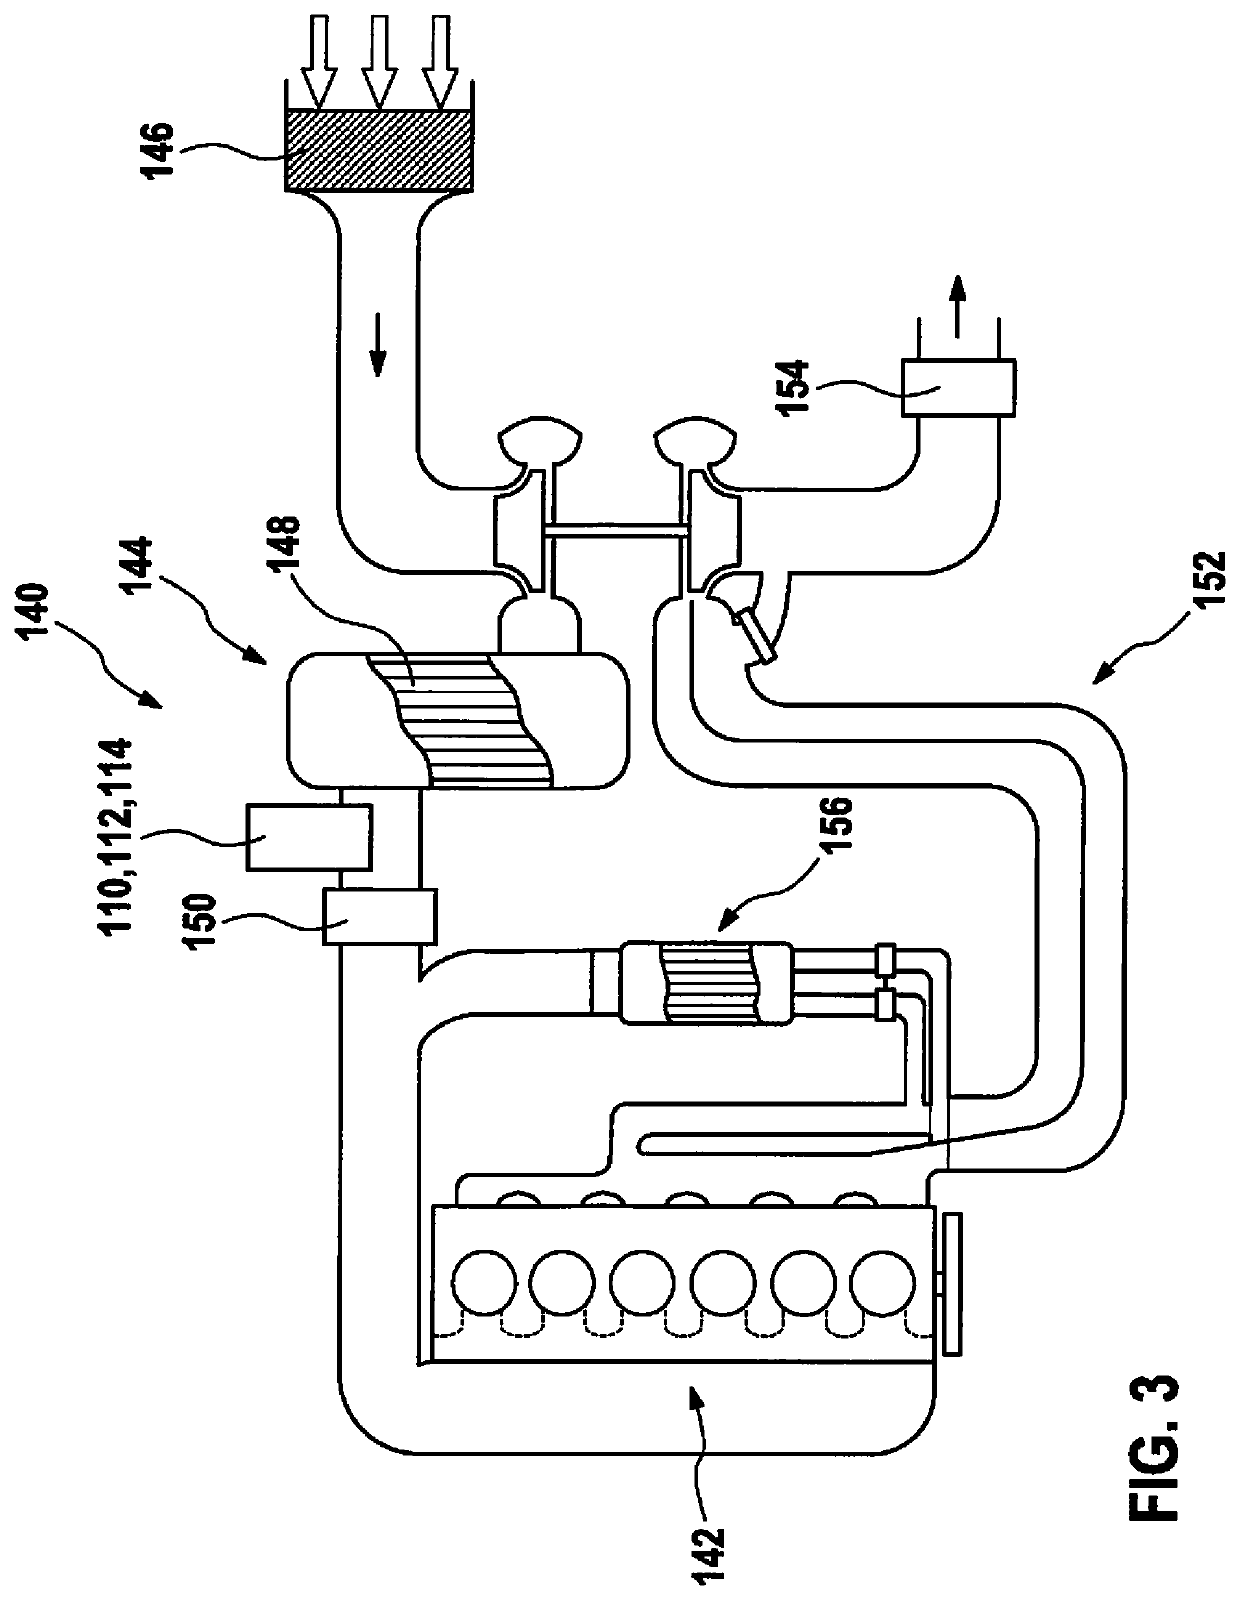 Sensor element for detecting at least one property of a fluid medium